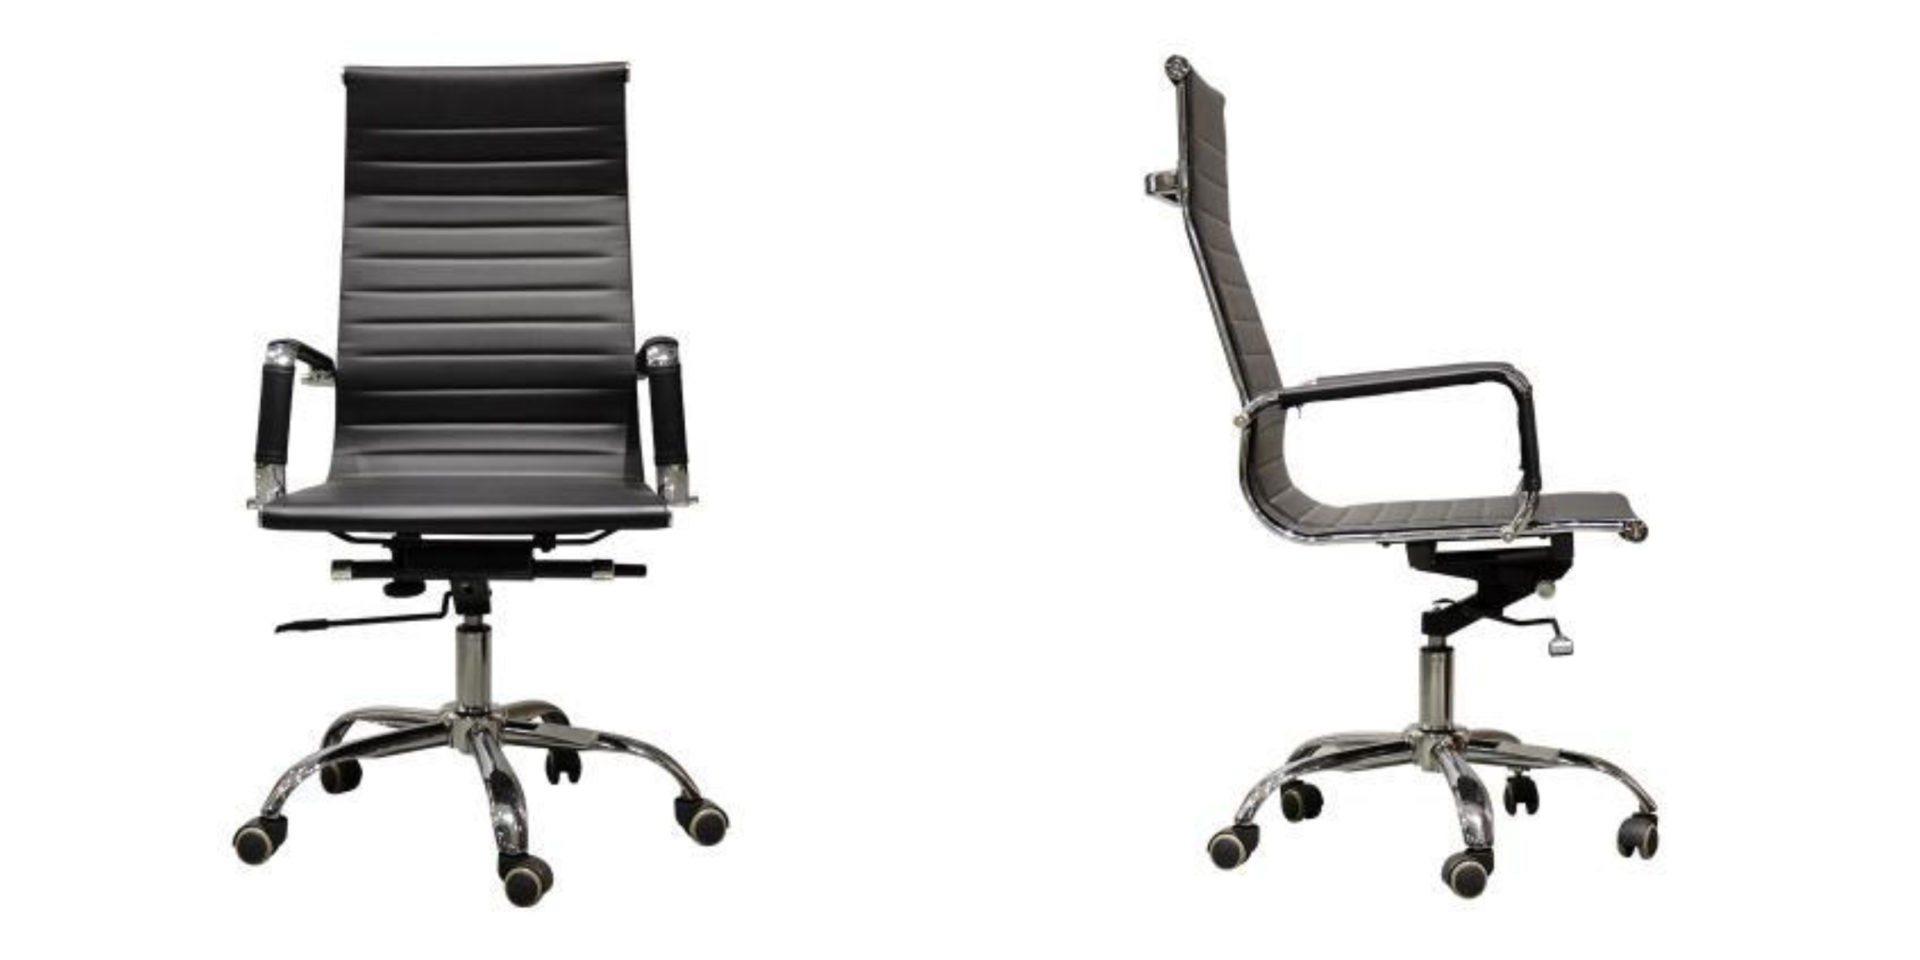 Ergonomic Chairs: Where To Find Great Office Chairs in the Philippines